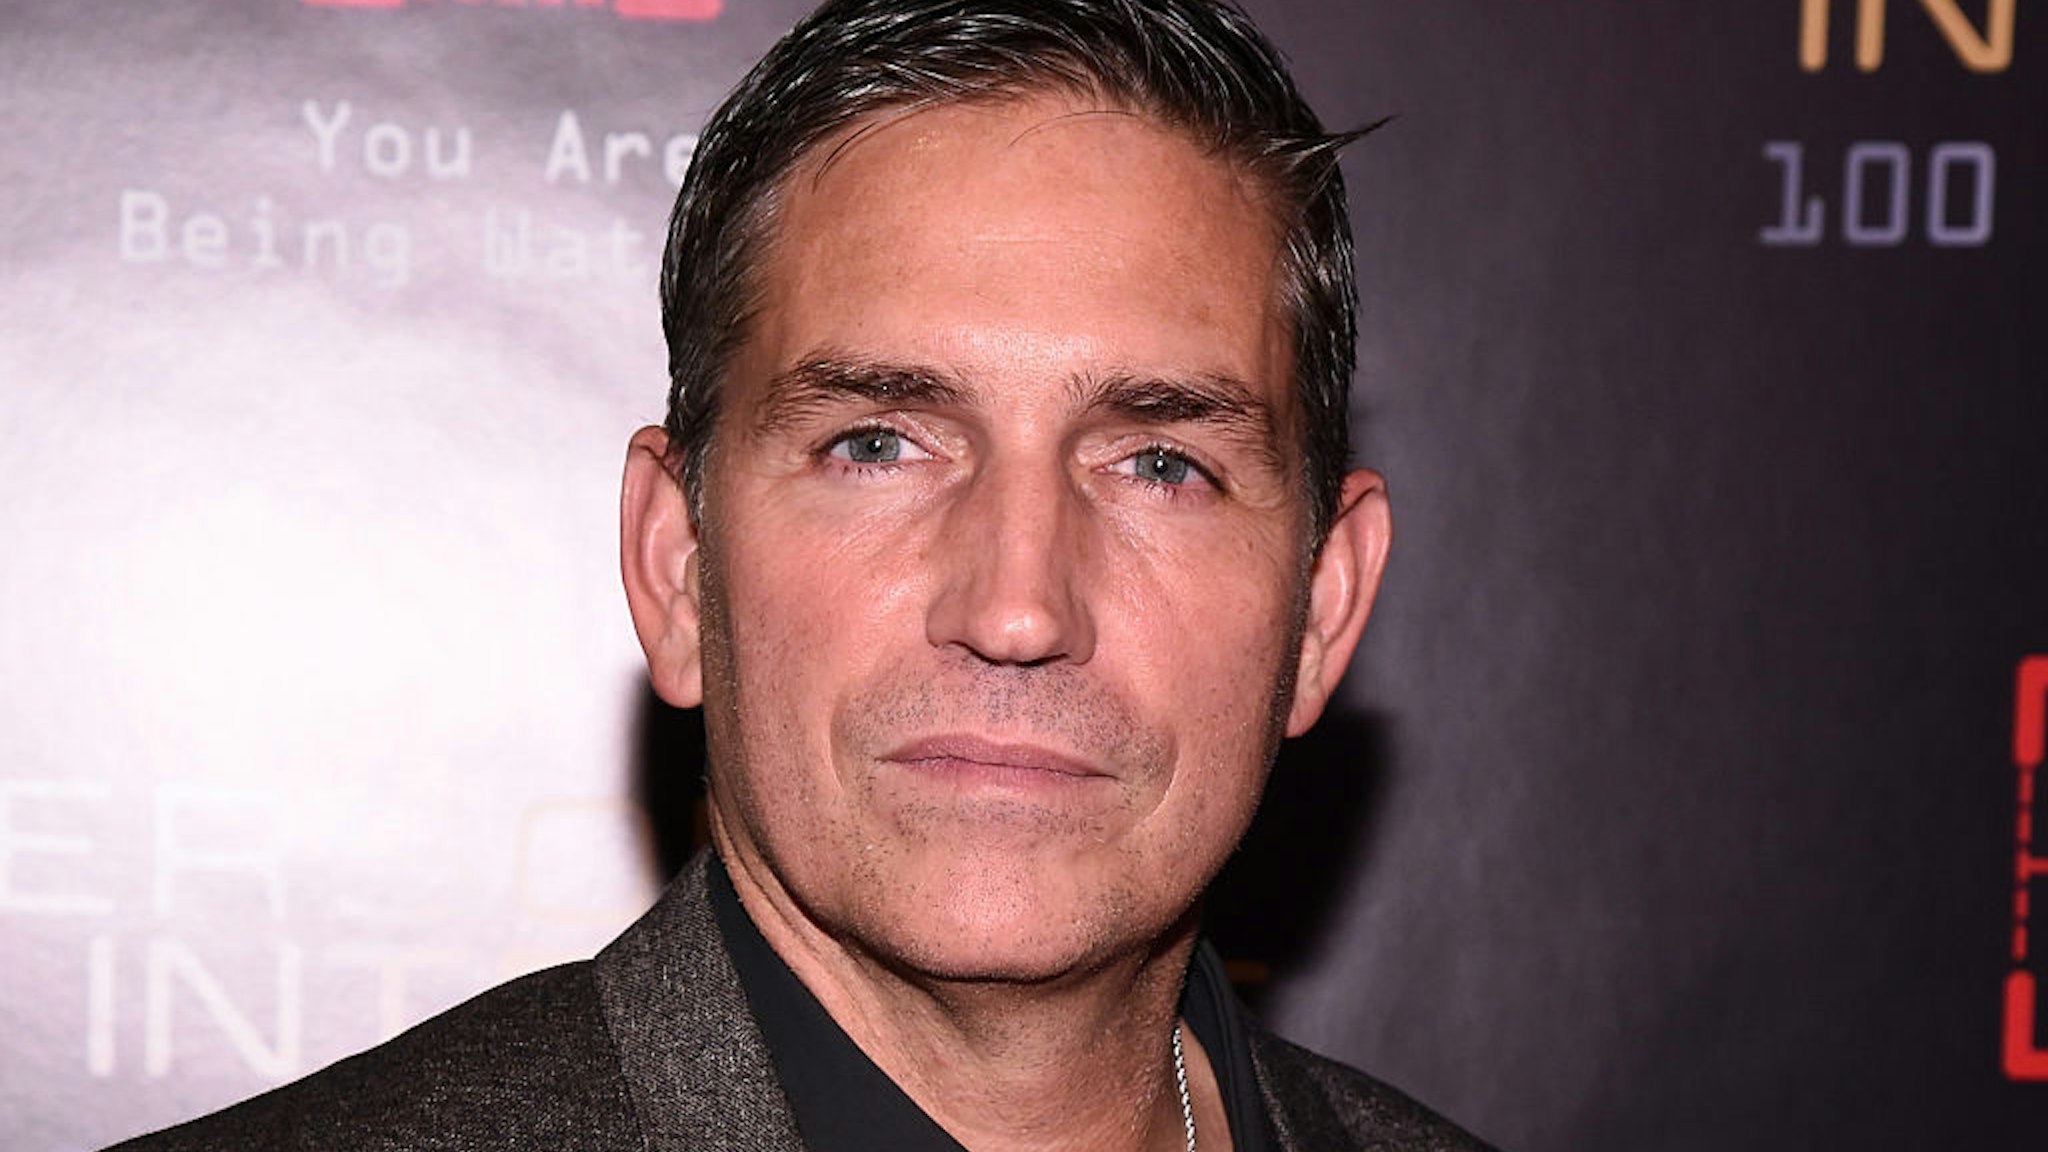 NEW YORK, NY - NOVEMBER 07: Actor Jim Caviezel attends "Person Of Interest" 100th Episode Celebration at 230 Fifth Avenue on November 7, 2015 in New York City. (Photo by Ilya S. Savenok/Getty Images)